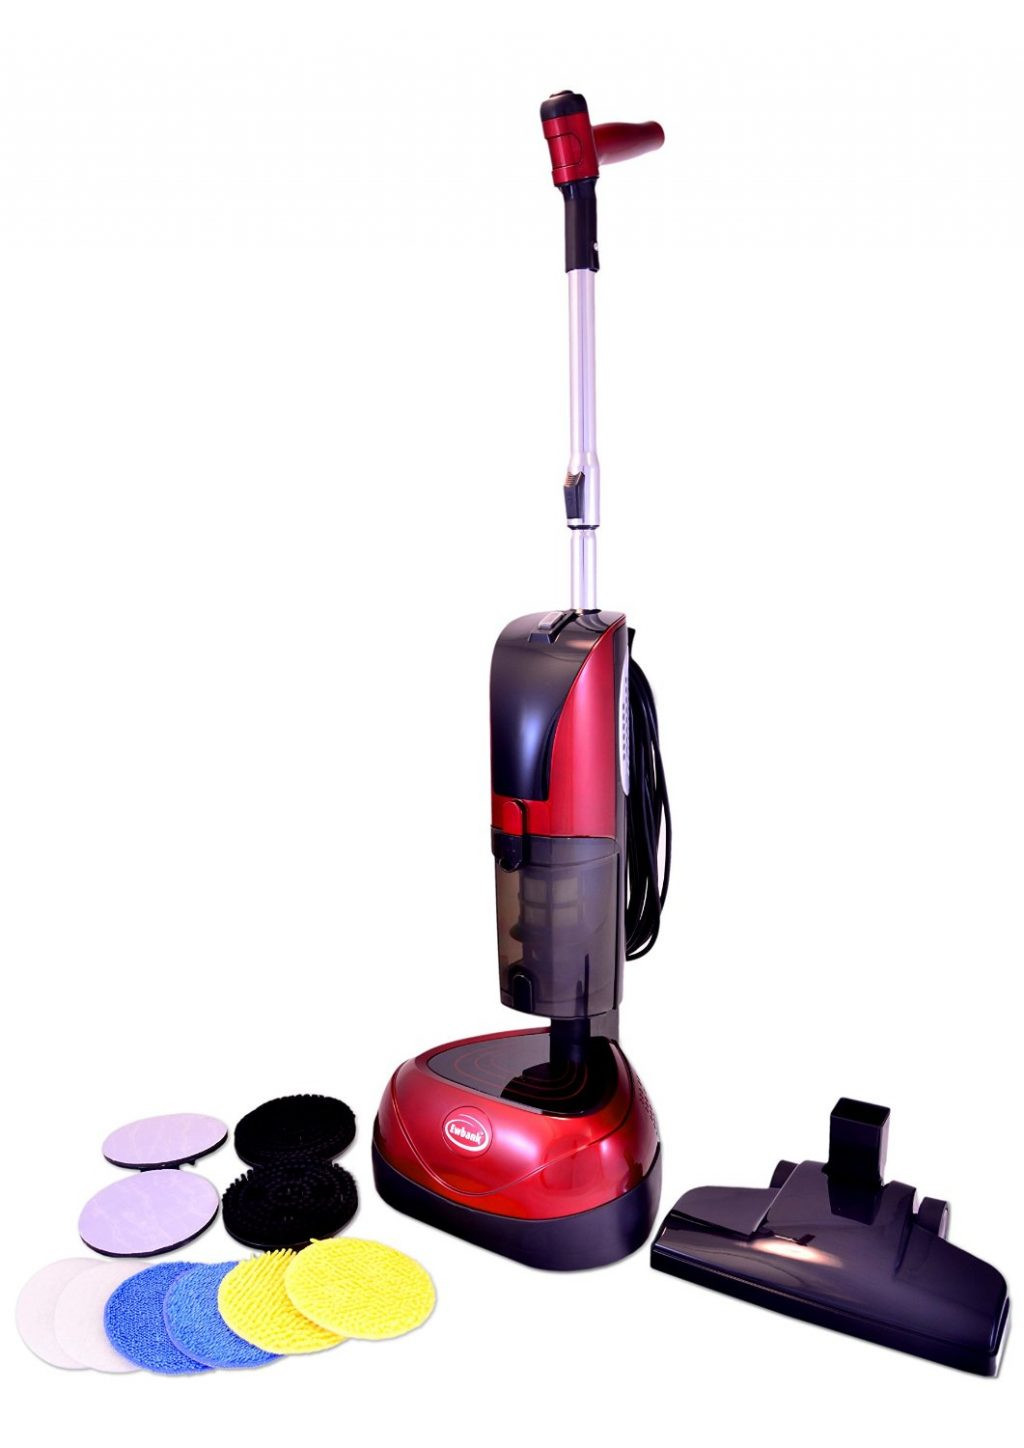 Hardwood Floor Vacuum and Steam Cleaner Reviews Of Cleaning Machine Excelent top Floor Cleaning Machine Image Ideas within Excelent top Floor Cleaning Machine Image Ideas Best Polishing Machines and Buffers Reviews Ewbank Fp1000 Hard Polisher